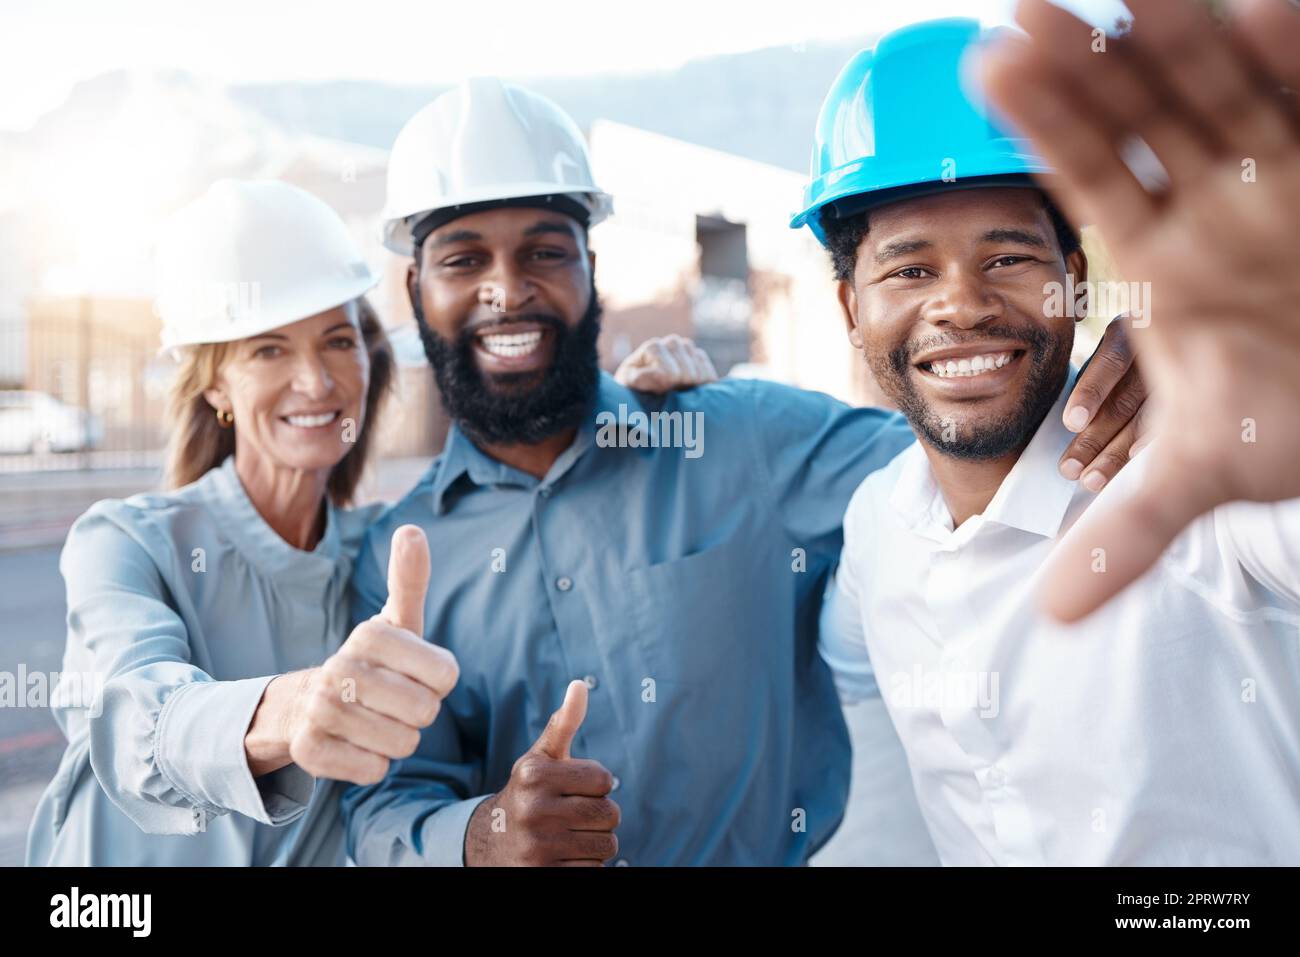 Happy, construction site and team selfie with the thumbs up gesture while building, planning and engineering. Architecture, smile and group of architects approve the safety of a development project Stock Photo